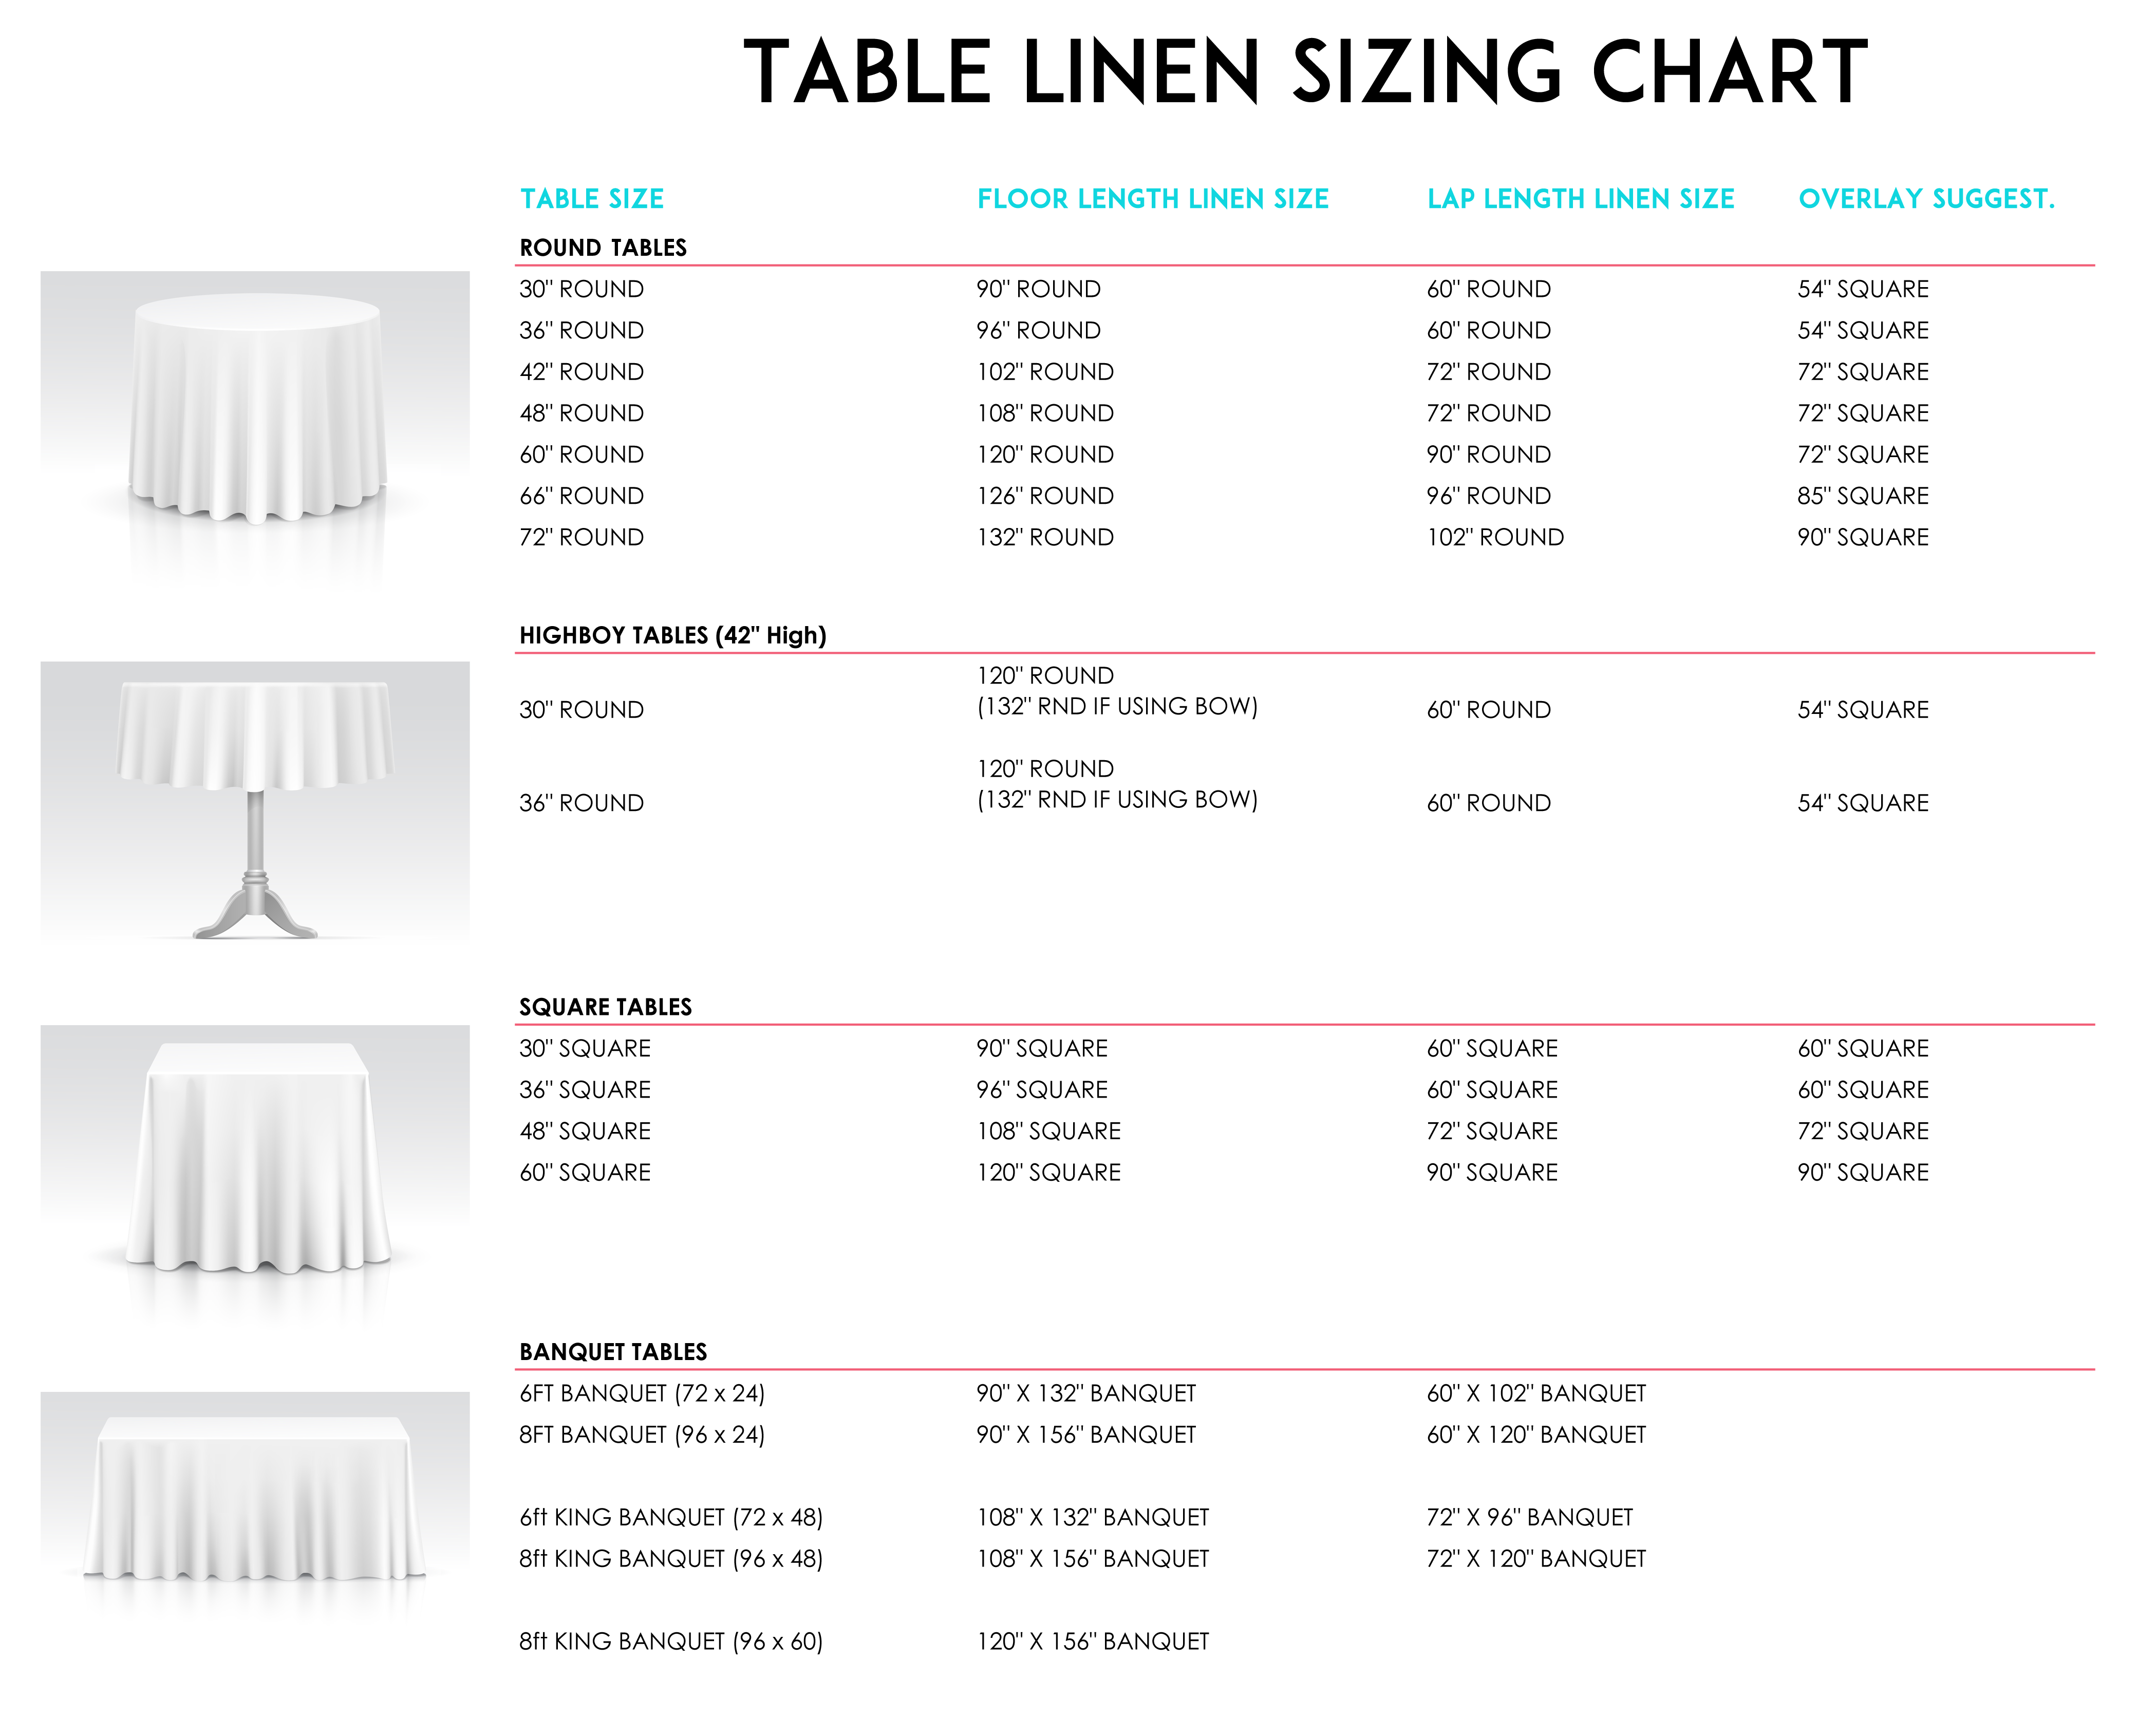 TABLE LINEN SIZING CHART